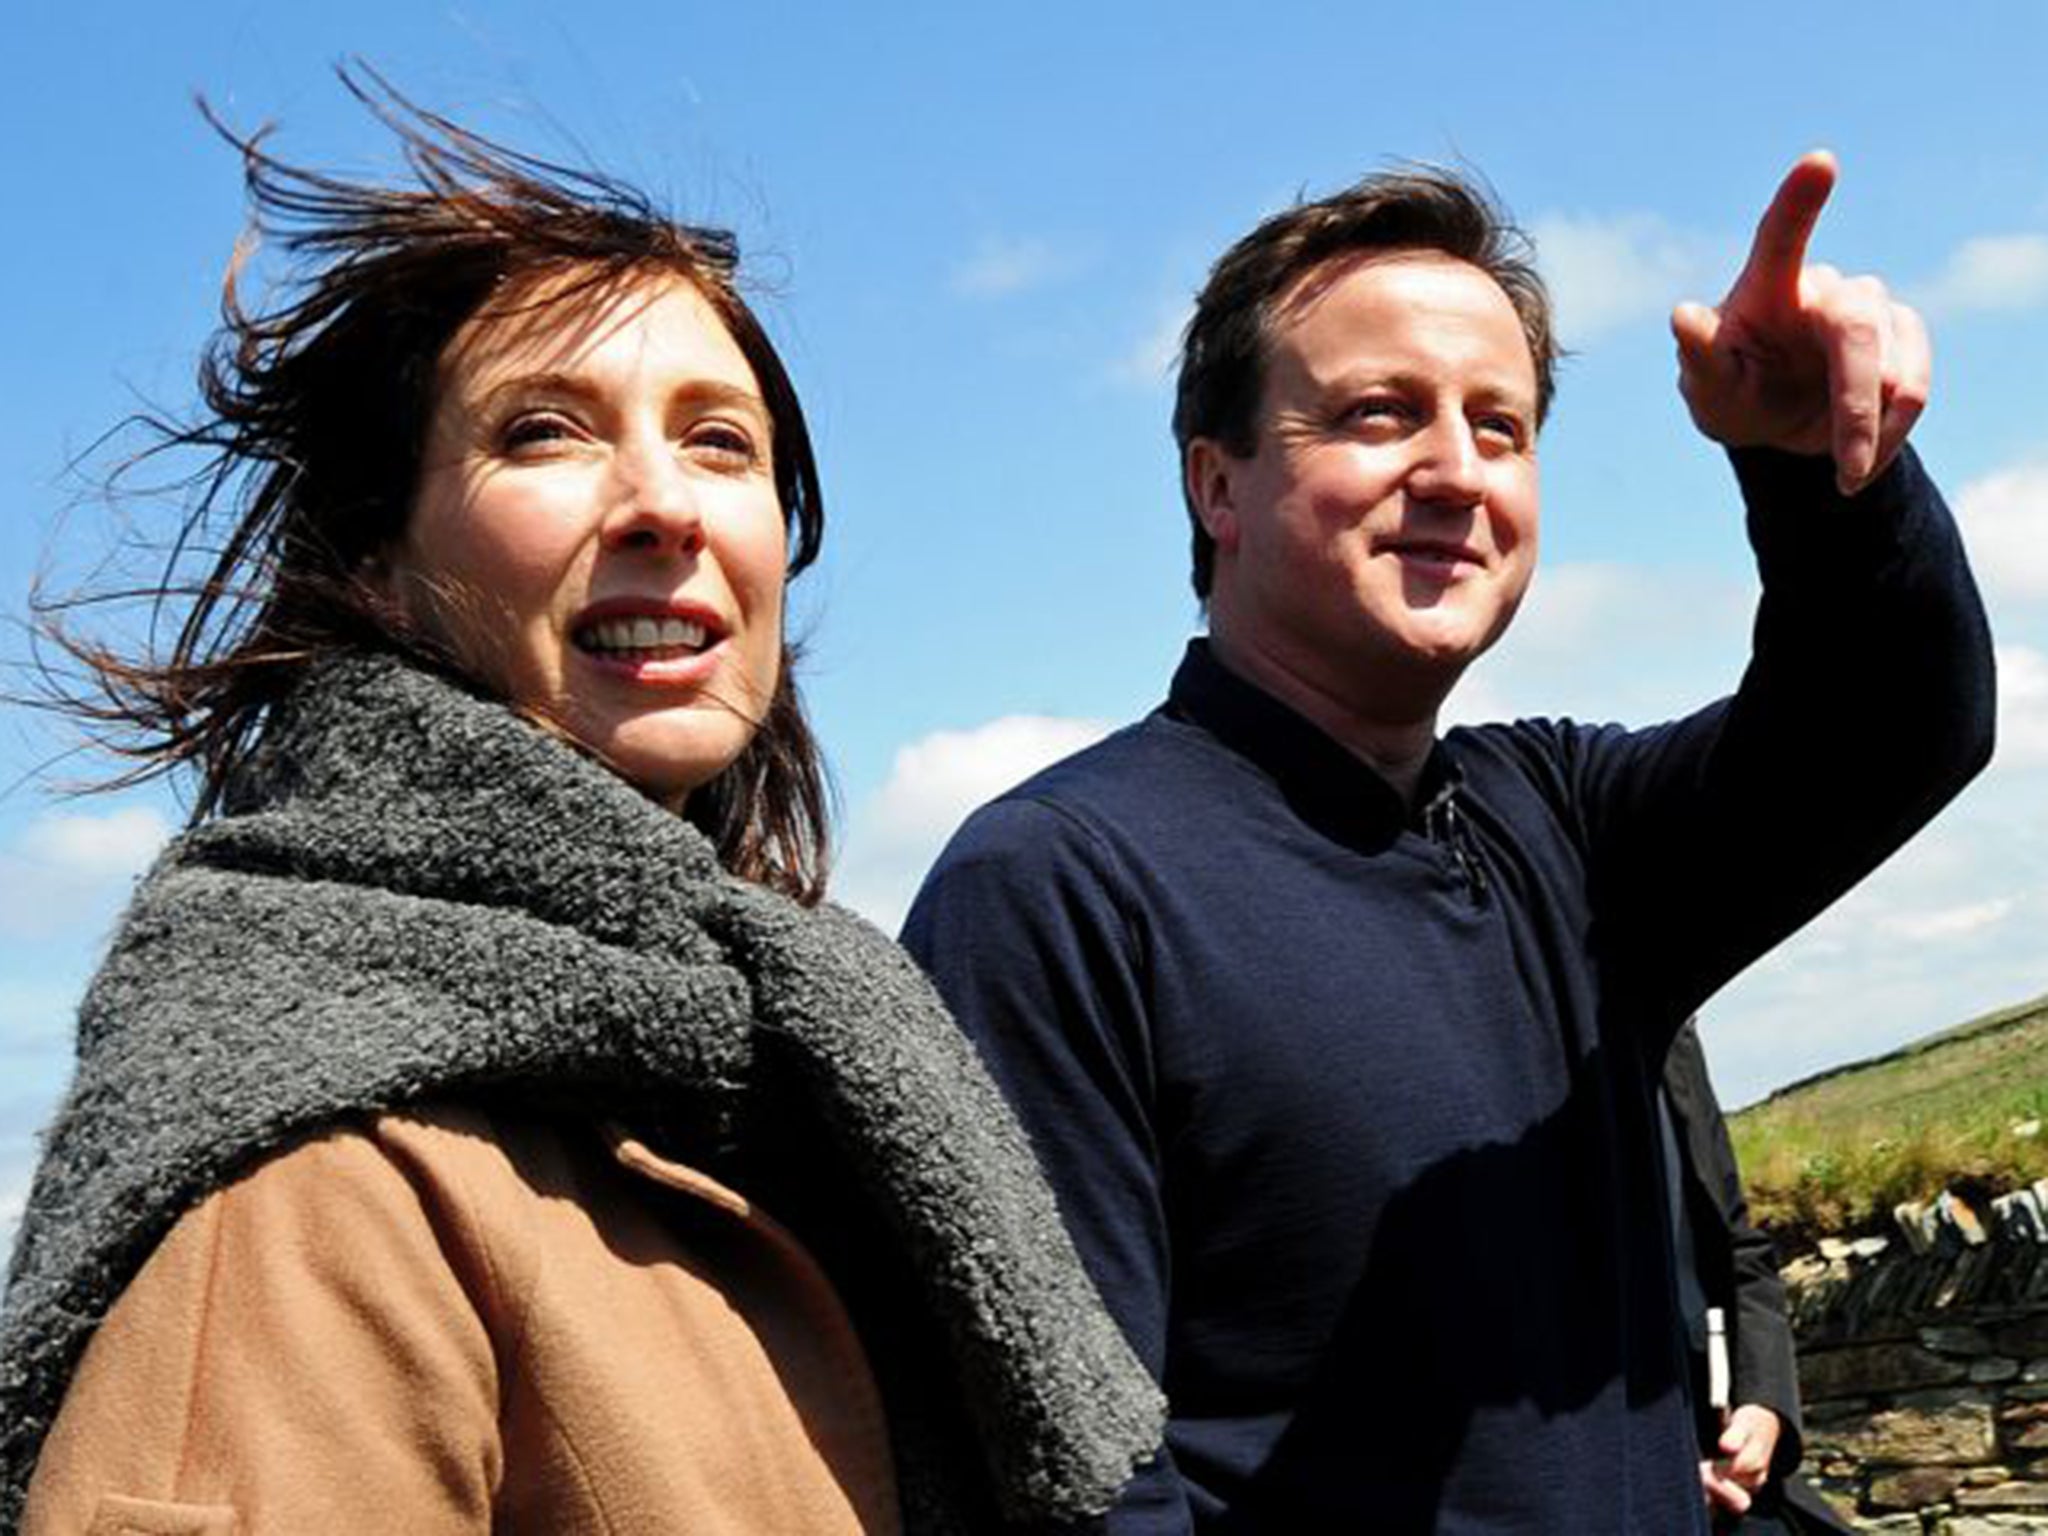 There’s a sense David and Samantha Cameron would be relieved to lose their security guards